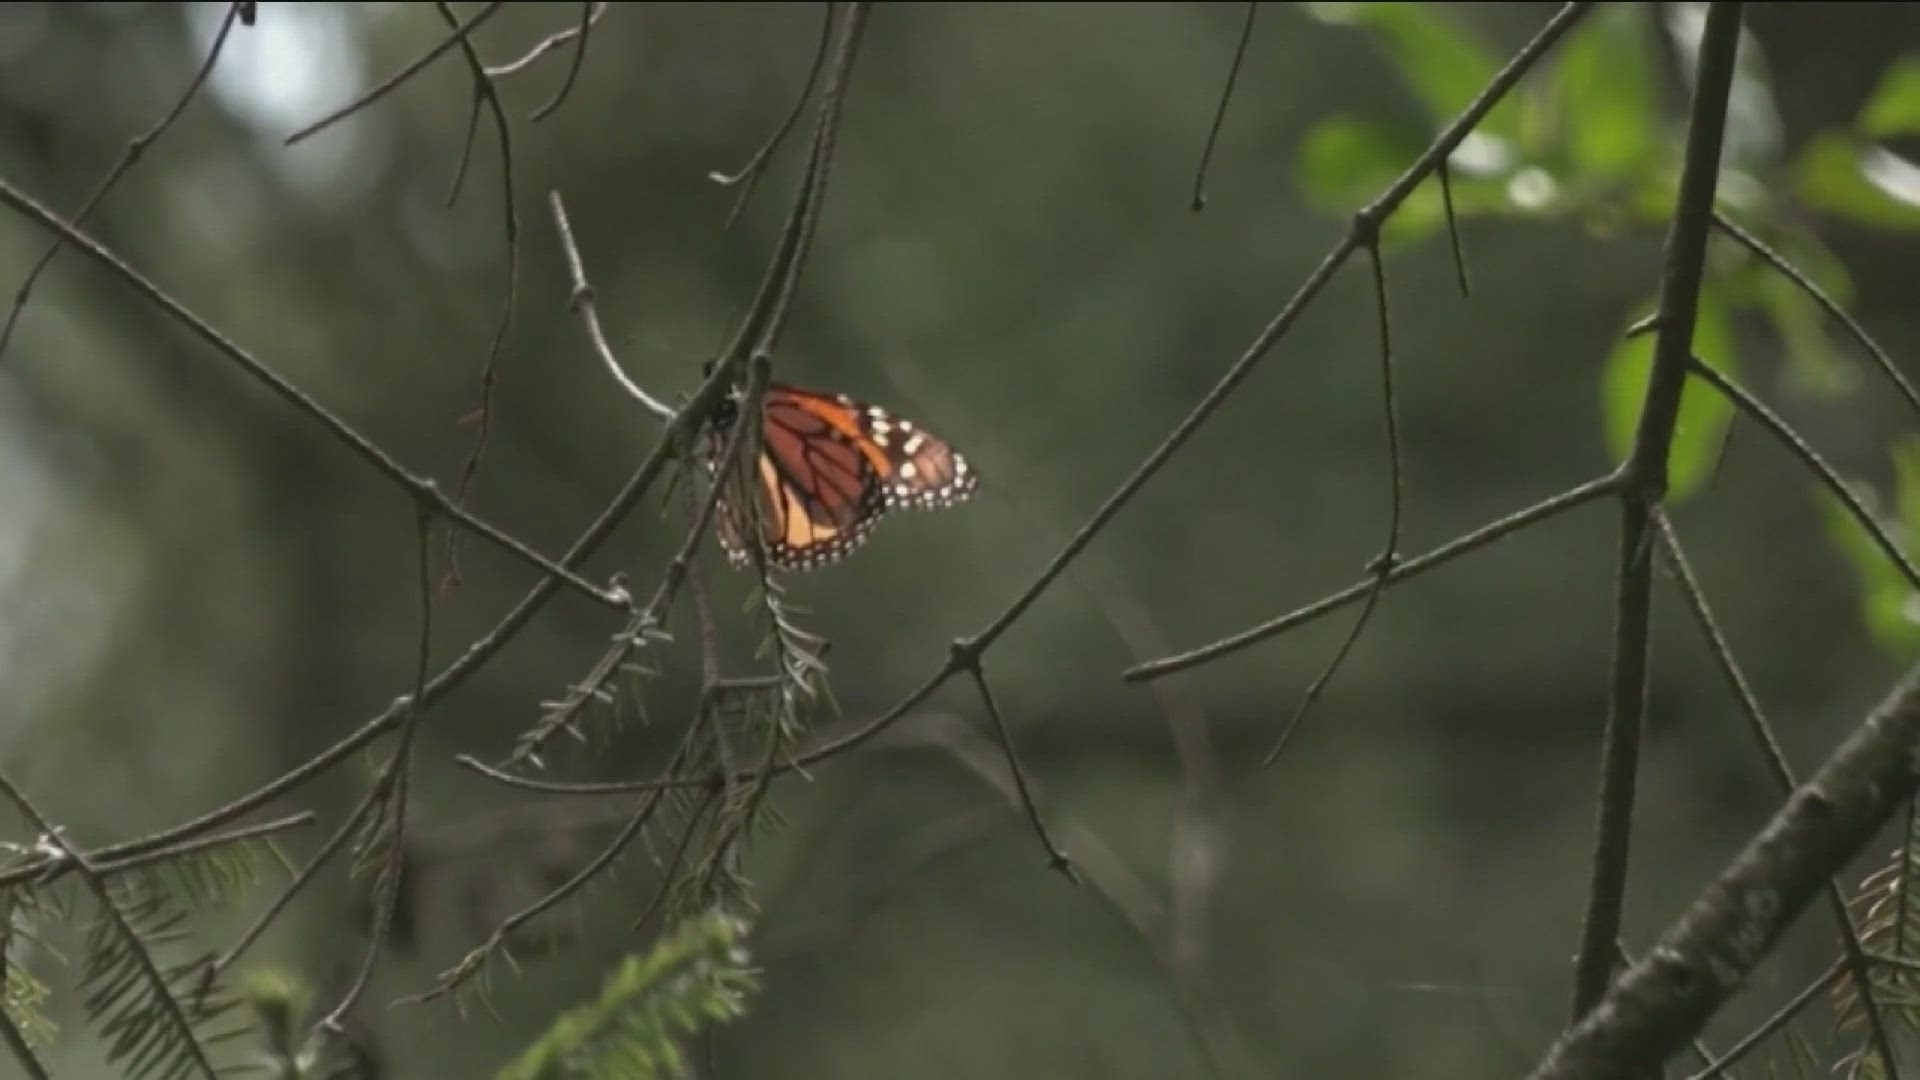 The number of monarch butterflies at their wintering areas in Mexico dropped by 59% this year to the second lowest level since record keeping began.